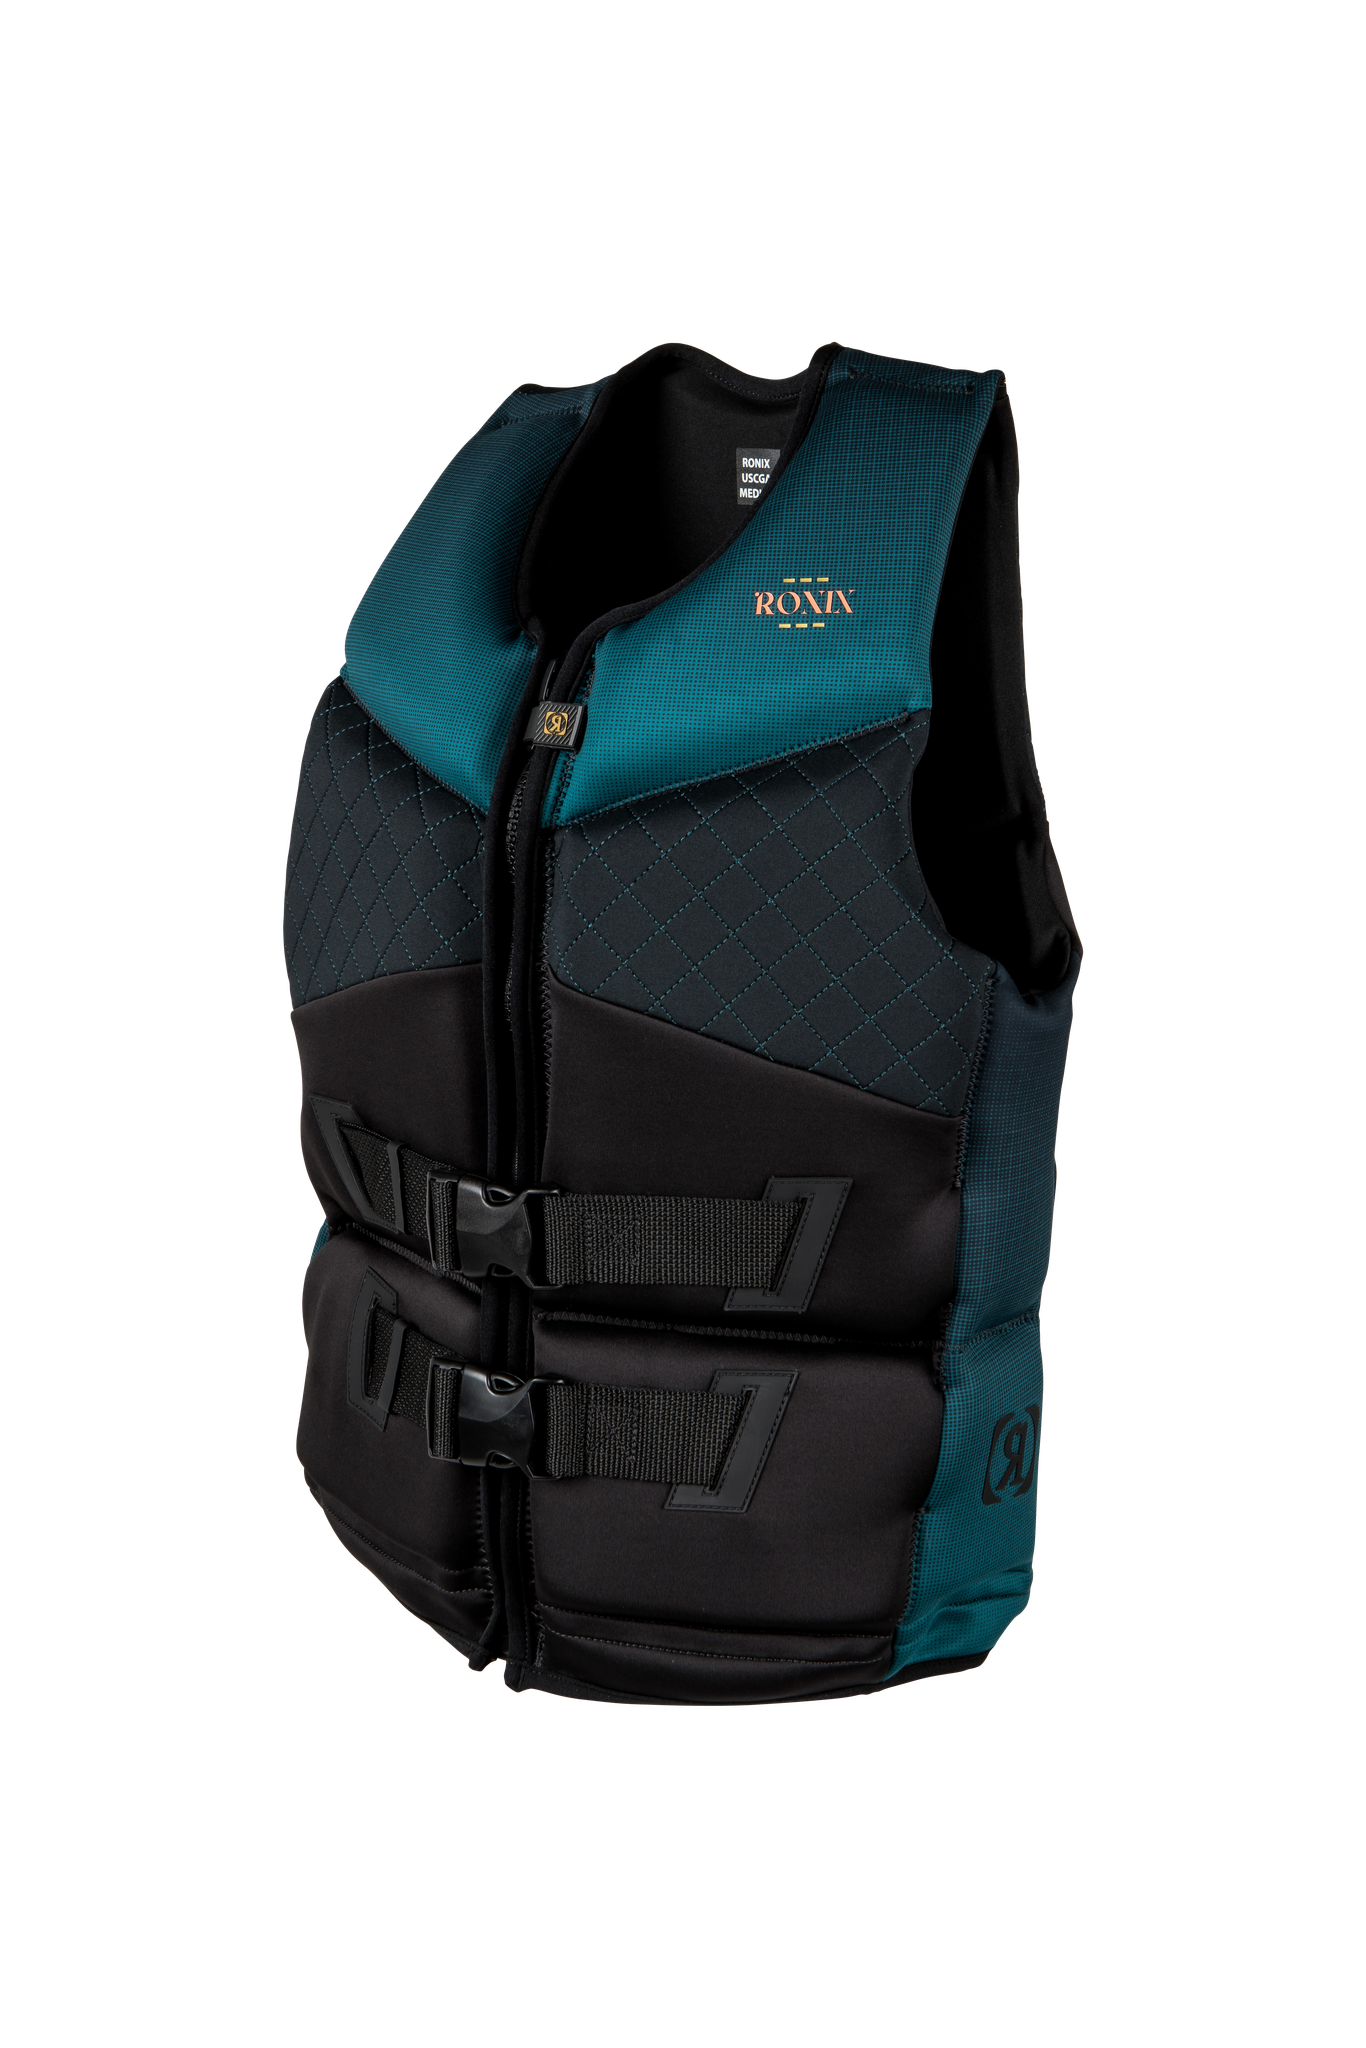 A Ronix Women's Imperial Capella 3.0 CGA Vest in teal and black, water resistant.